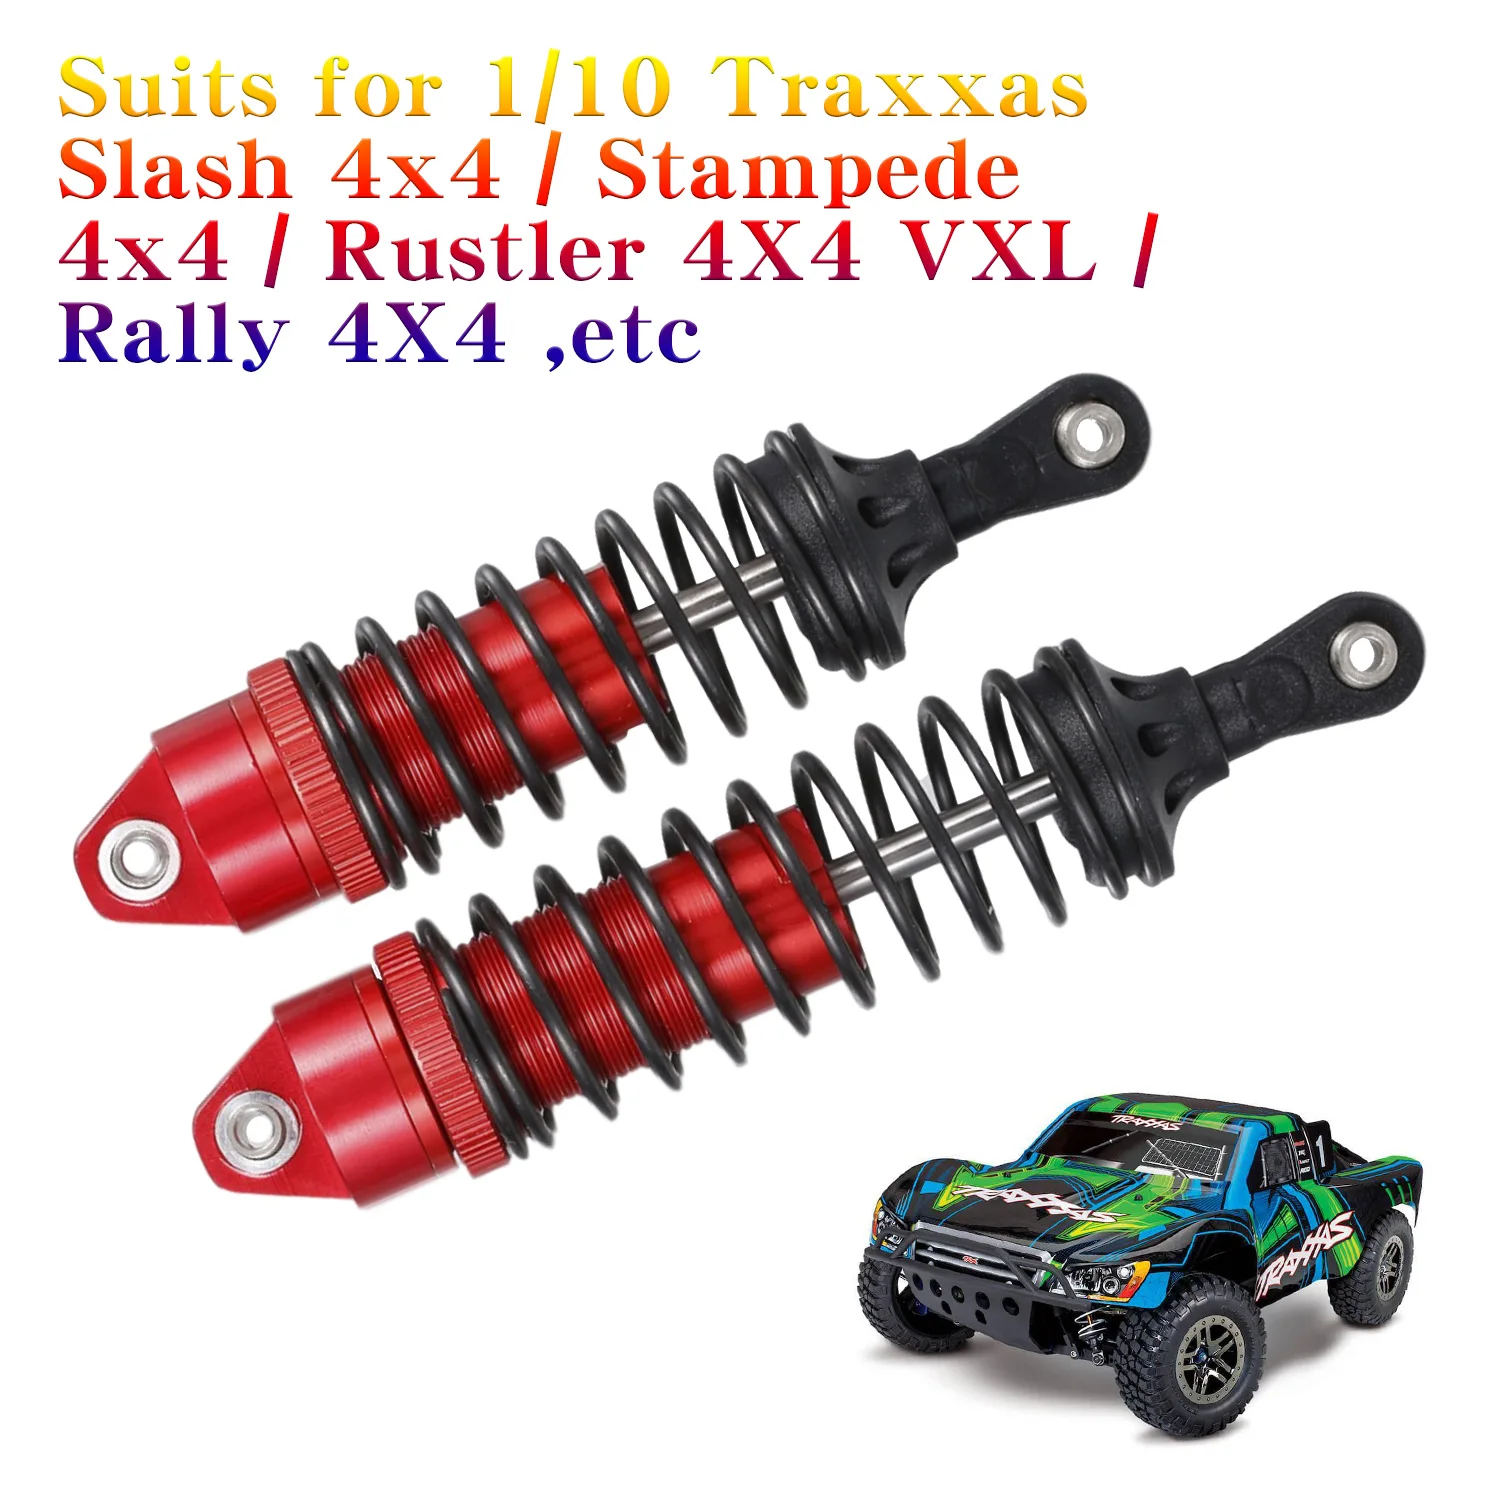 4PCS Alloy Front & Rear Shock Absorber Springs Upgrade Parts for 1/10 Traxxas Slash 4x4 4WD Option Parts 